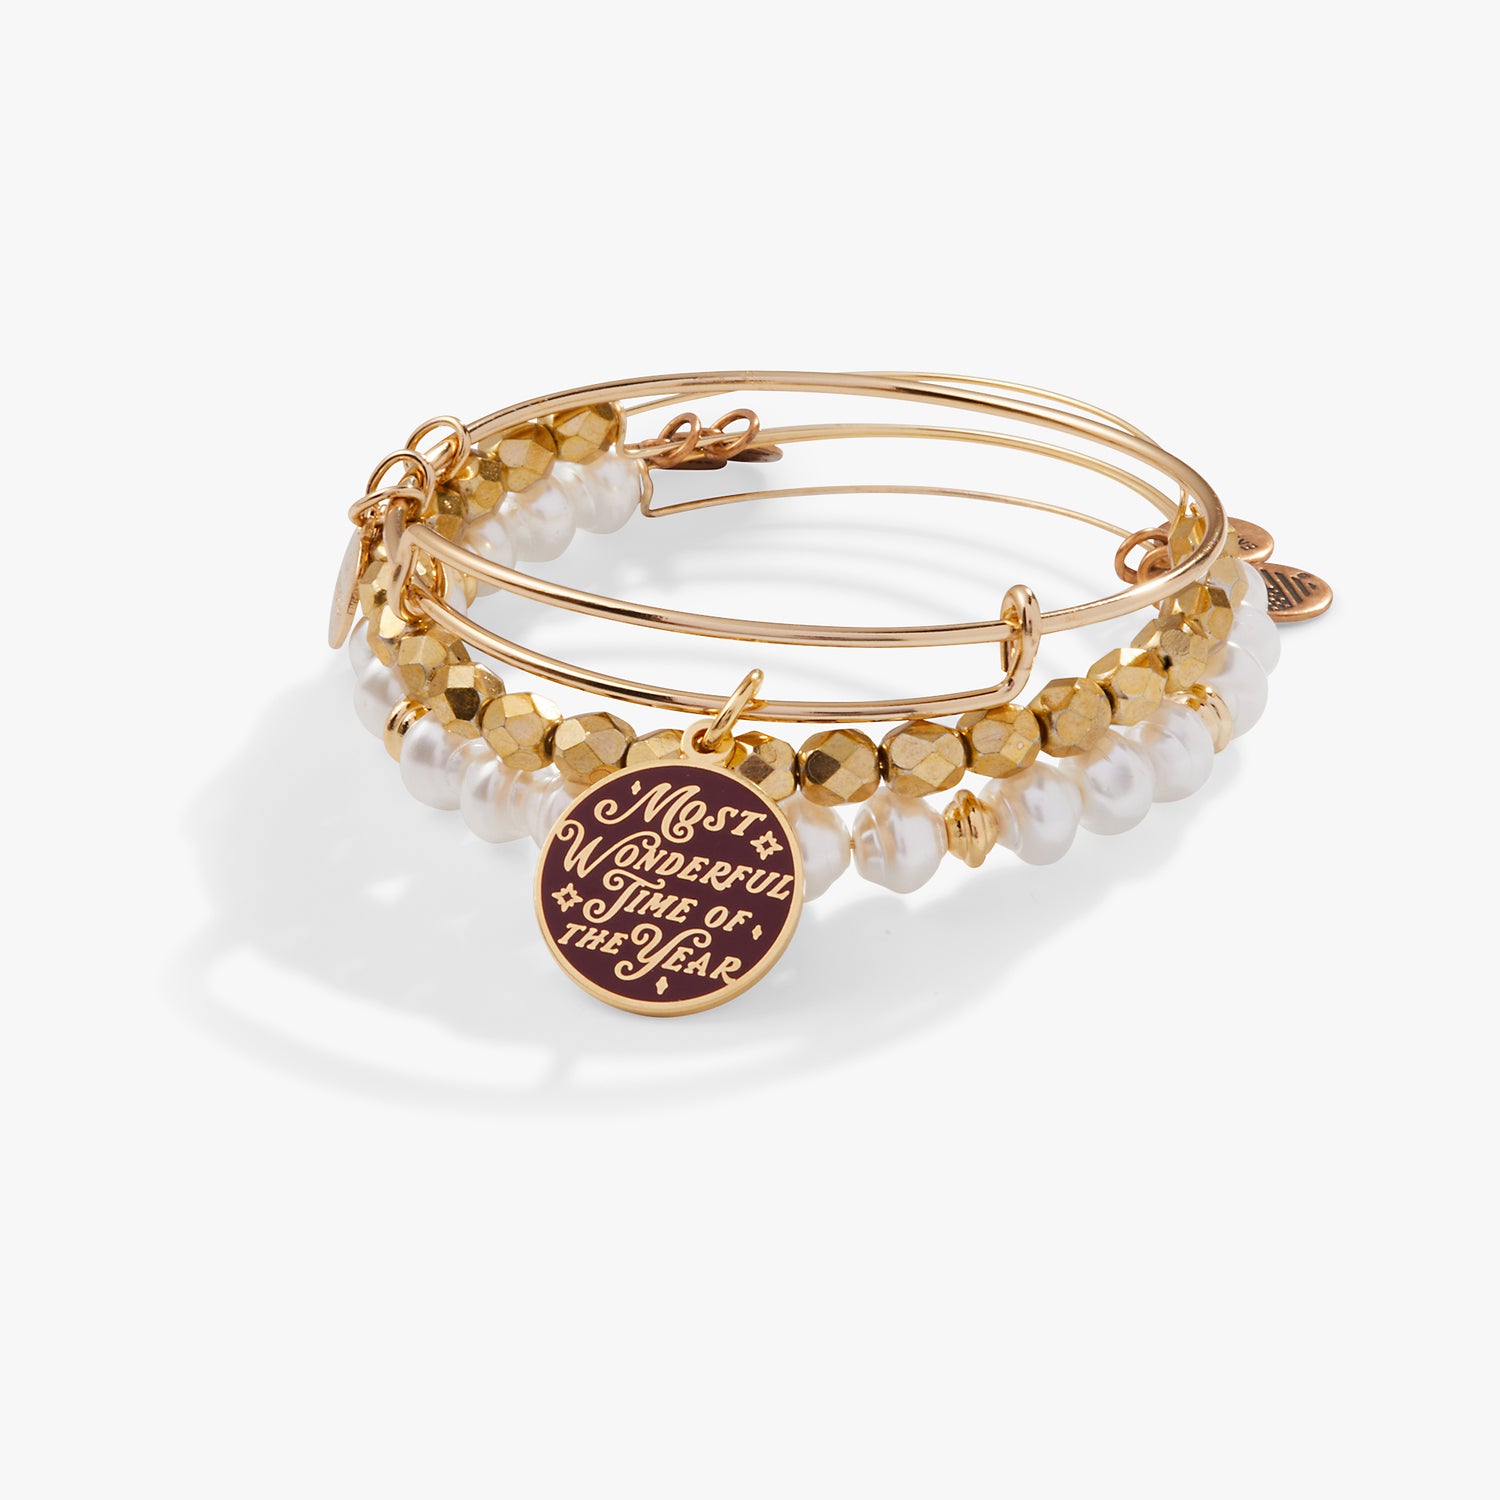 'Most Wonderful Time of the Year' Charm Bangle, Set of 3